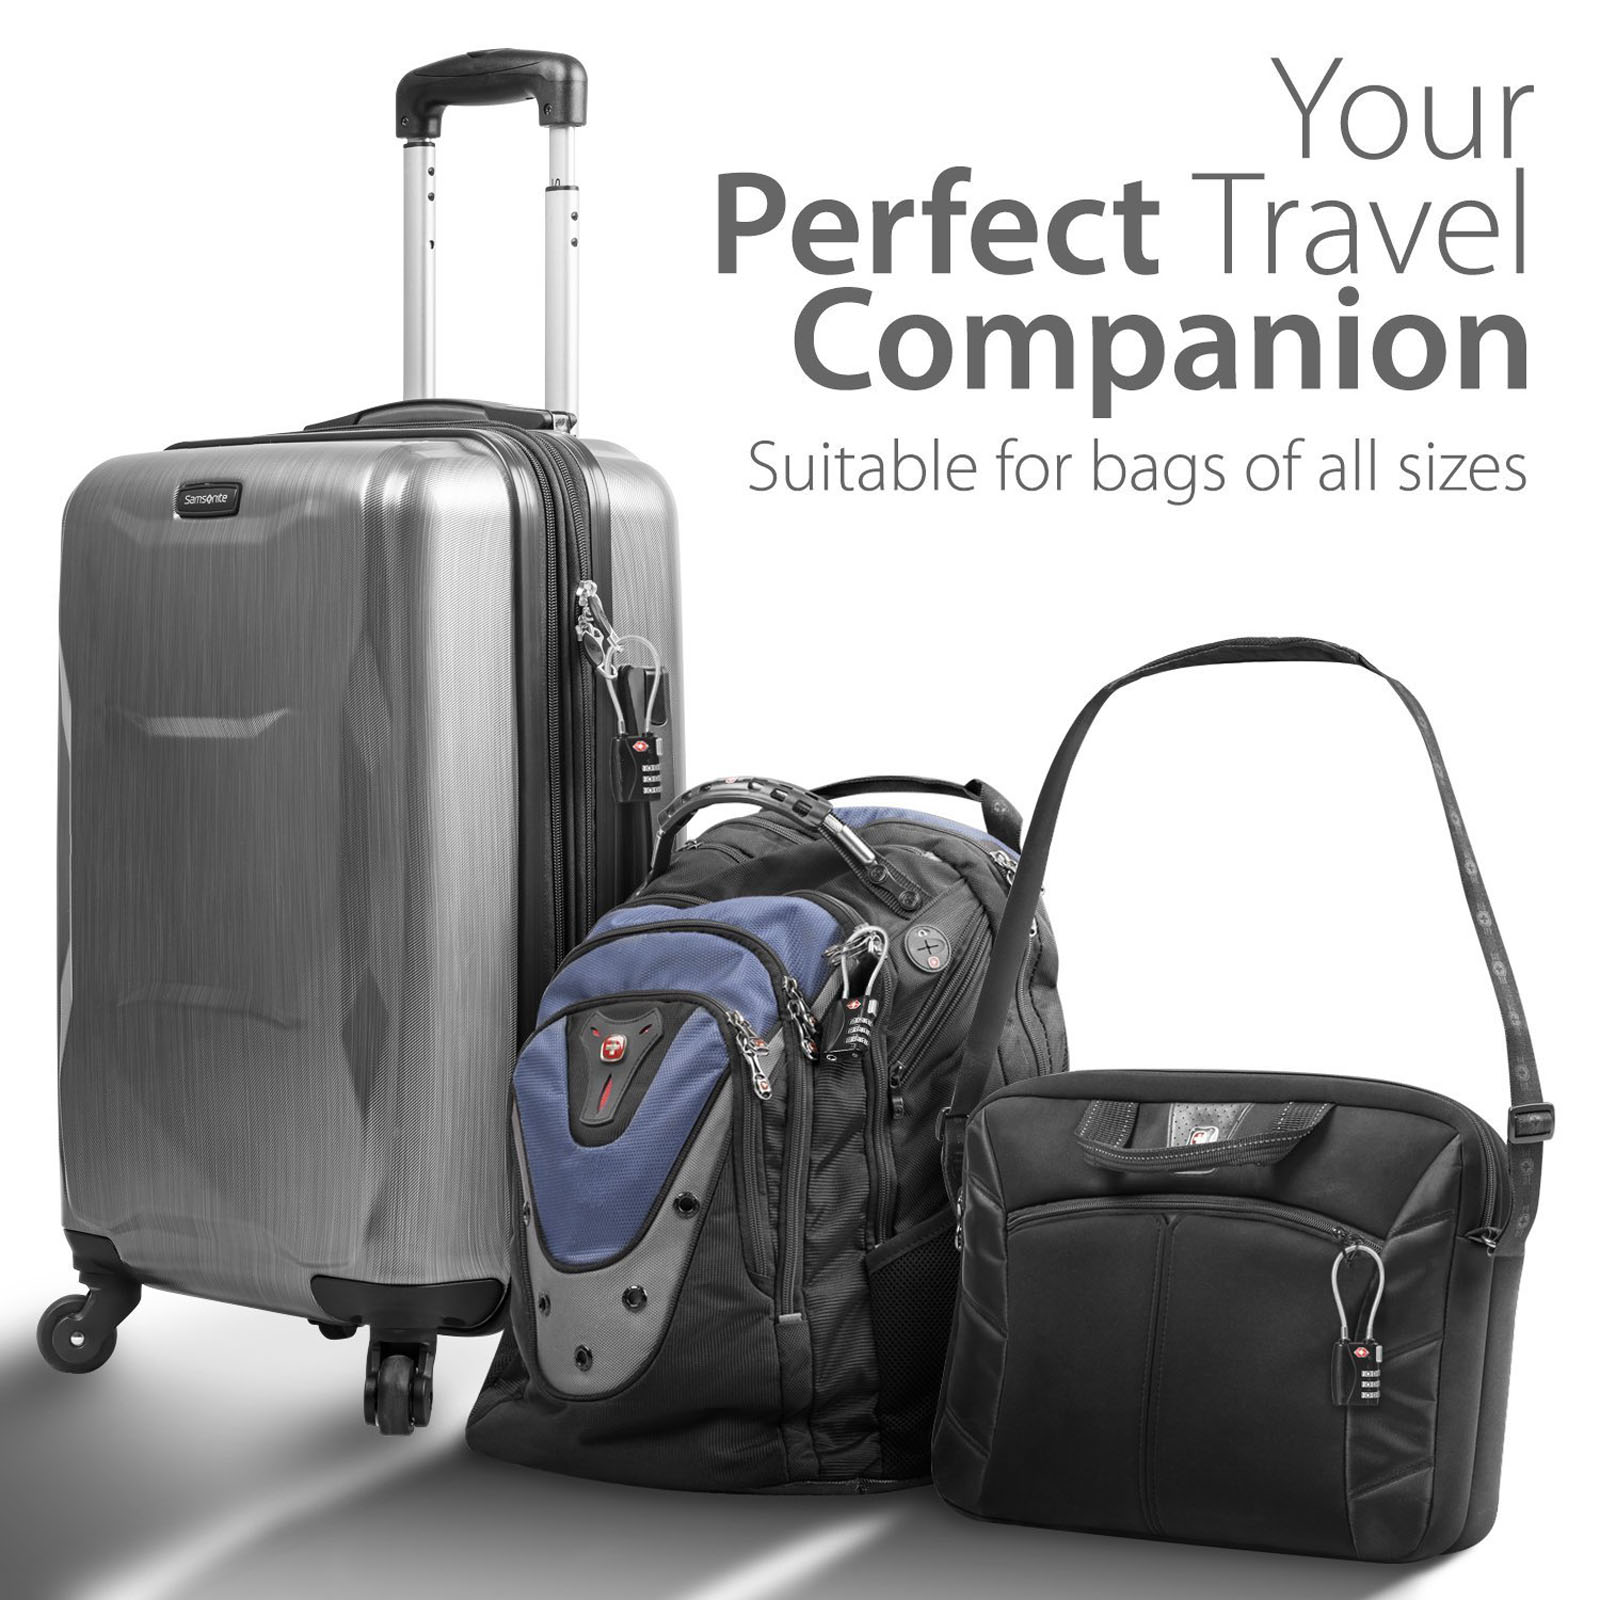 Suitcase Belt Adjustable Luggage Strap Travel Accessories Holiday